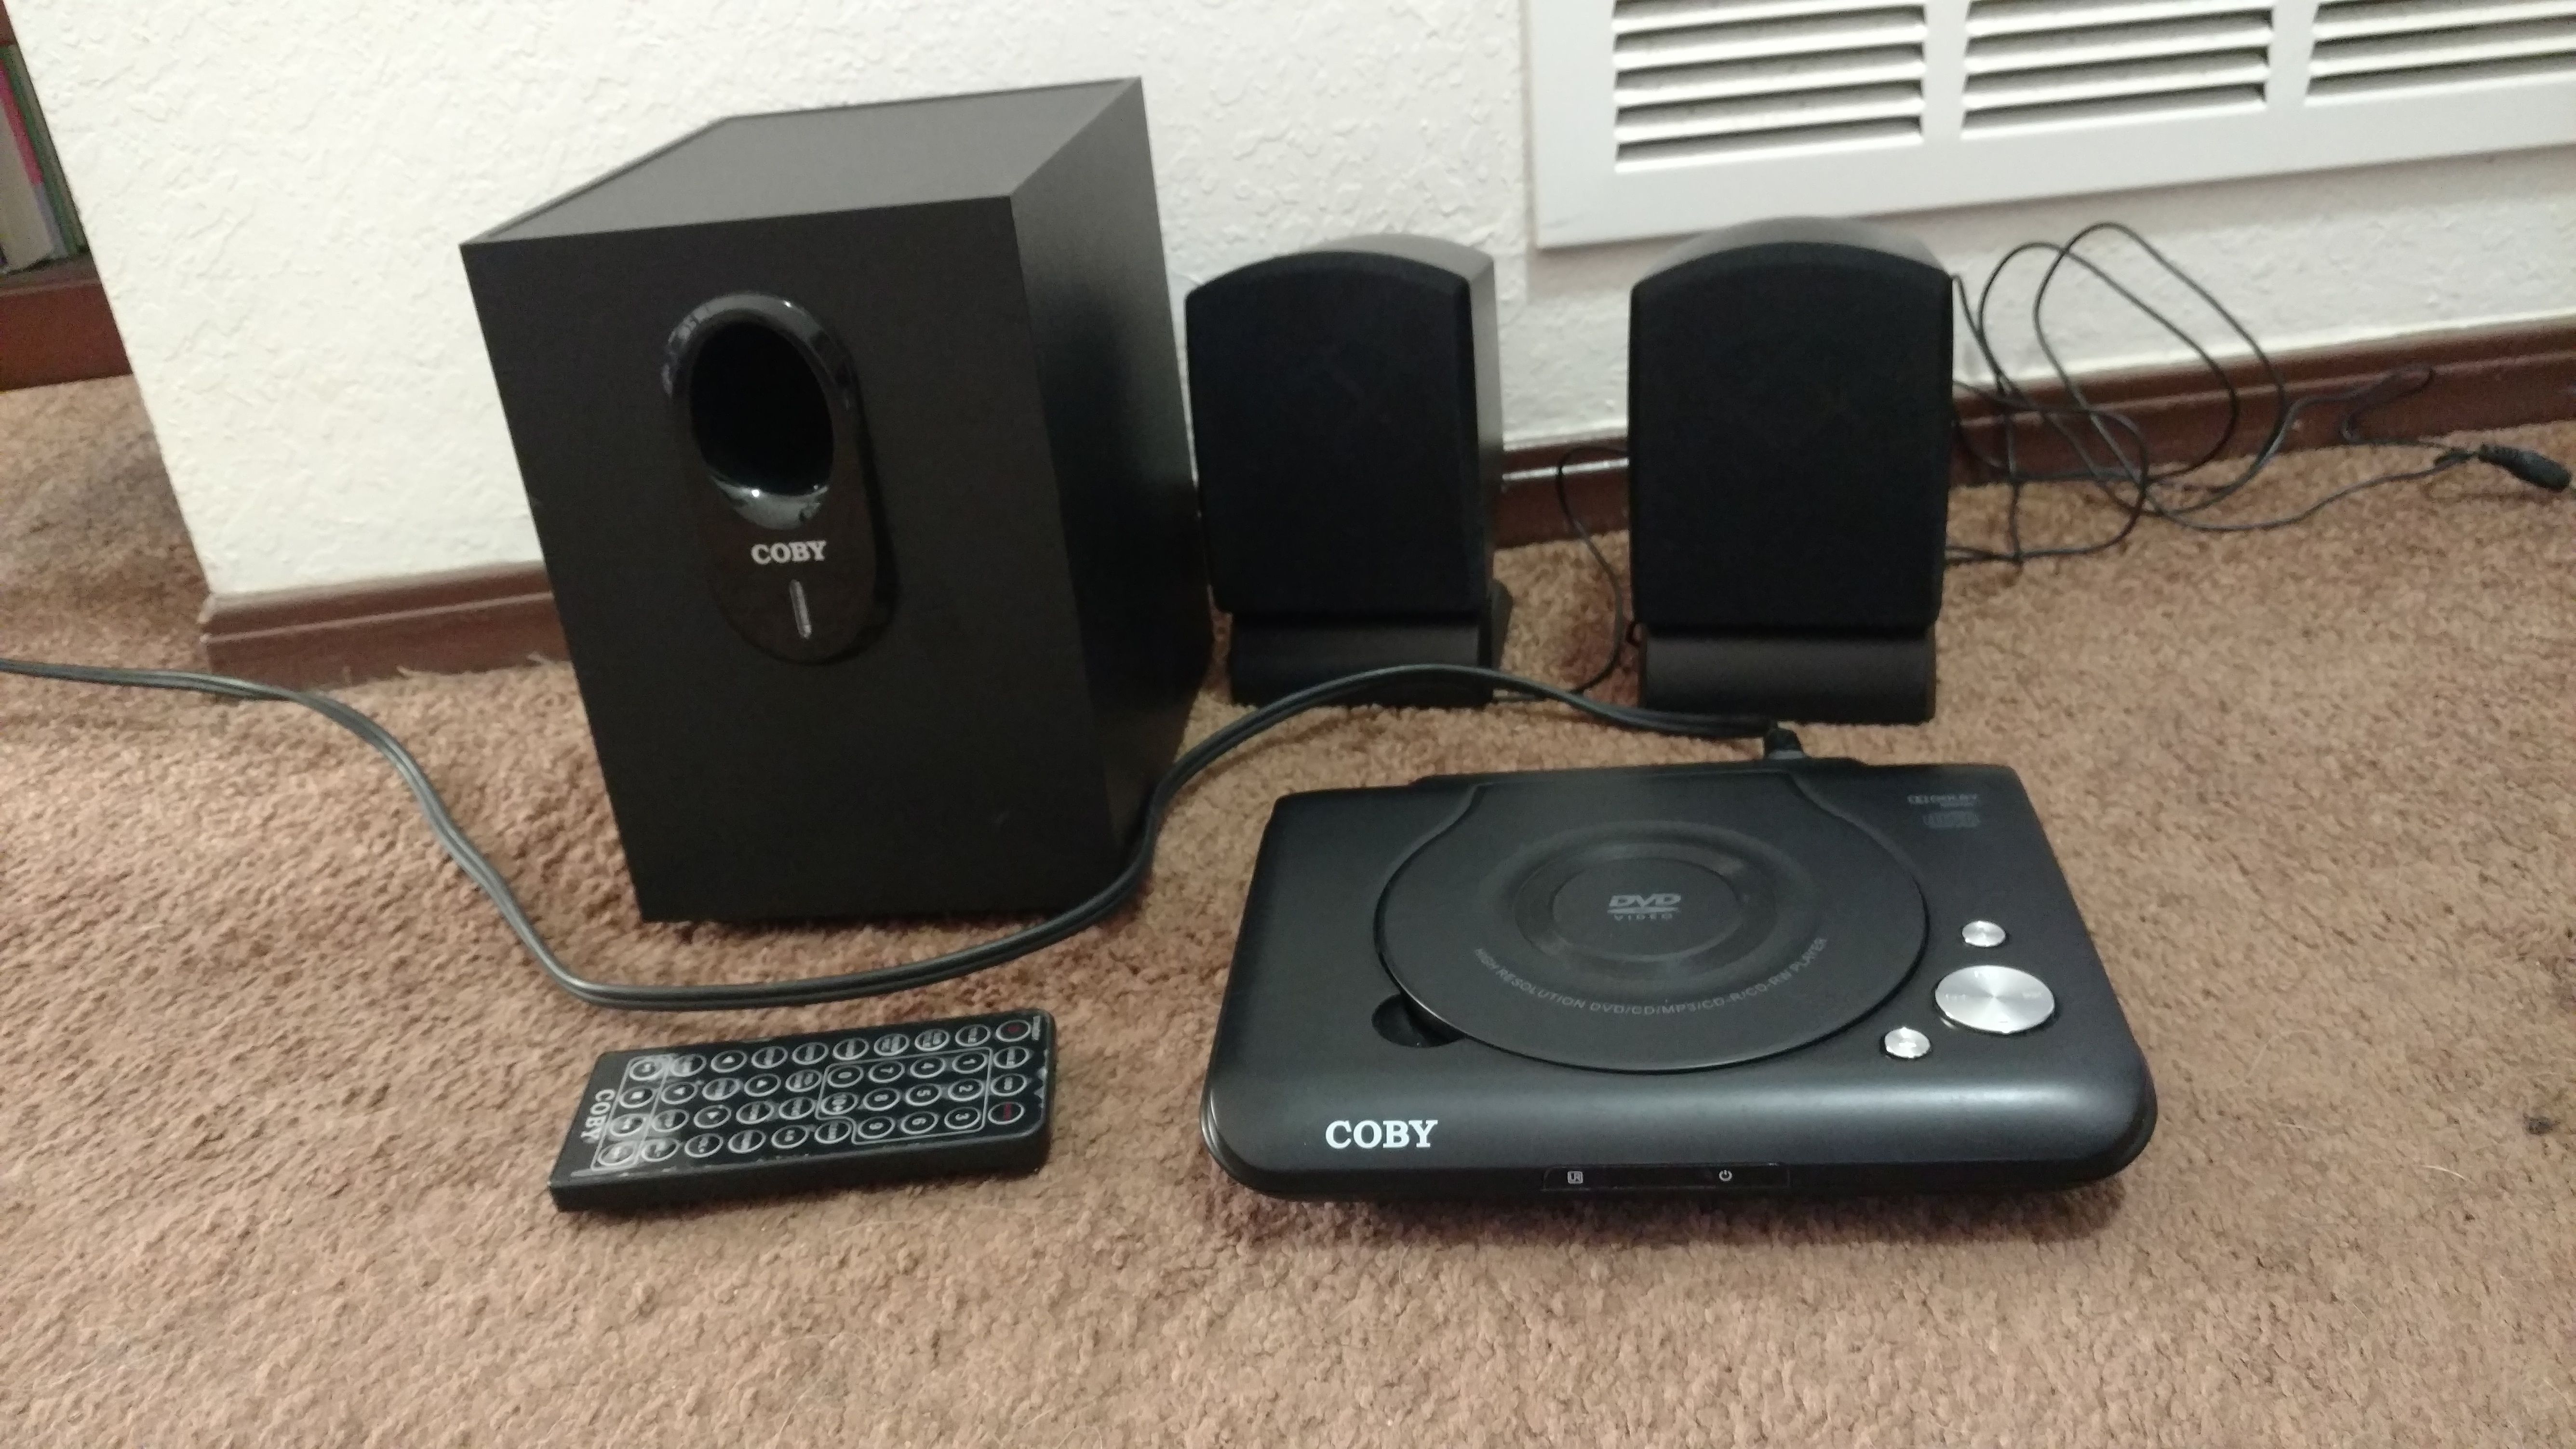 Coby mini surround sound with DVD player